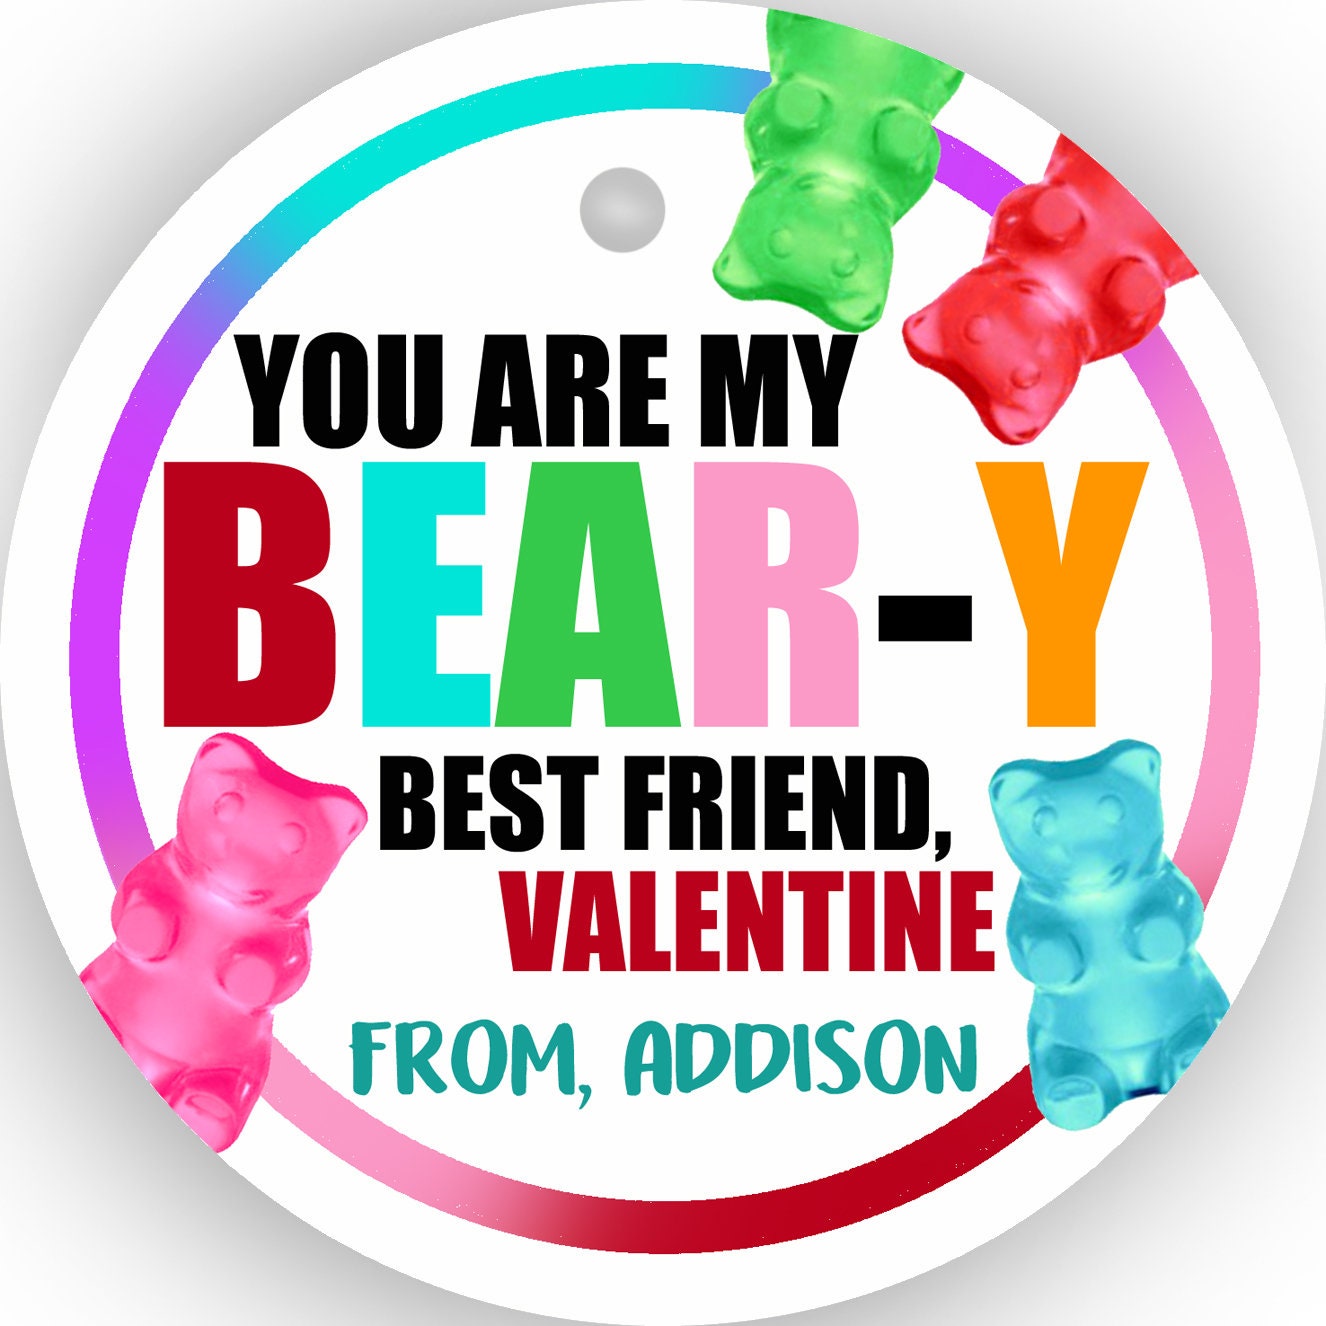 Gummy Bear Valentine You to Go With Cute Gummies for Kid's Valentine's Day  Gifts Friends Class Instant Digital Download or Print Mailed -  Denmark